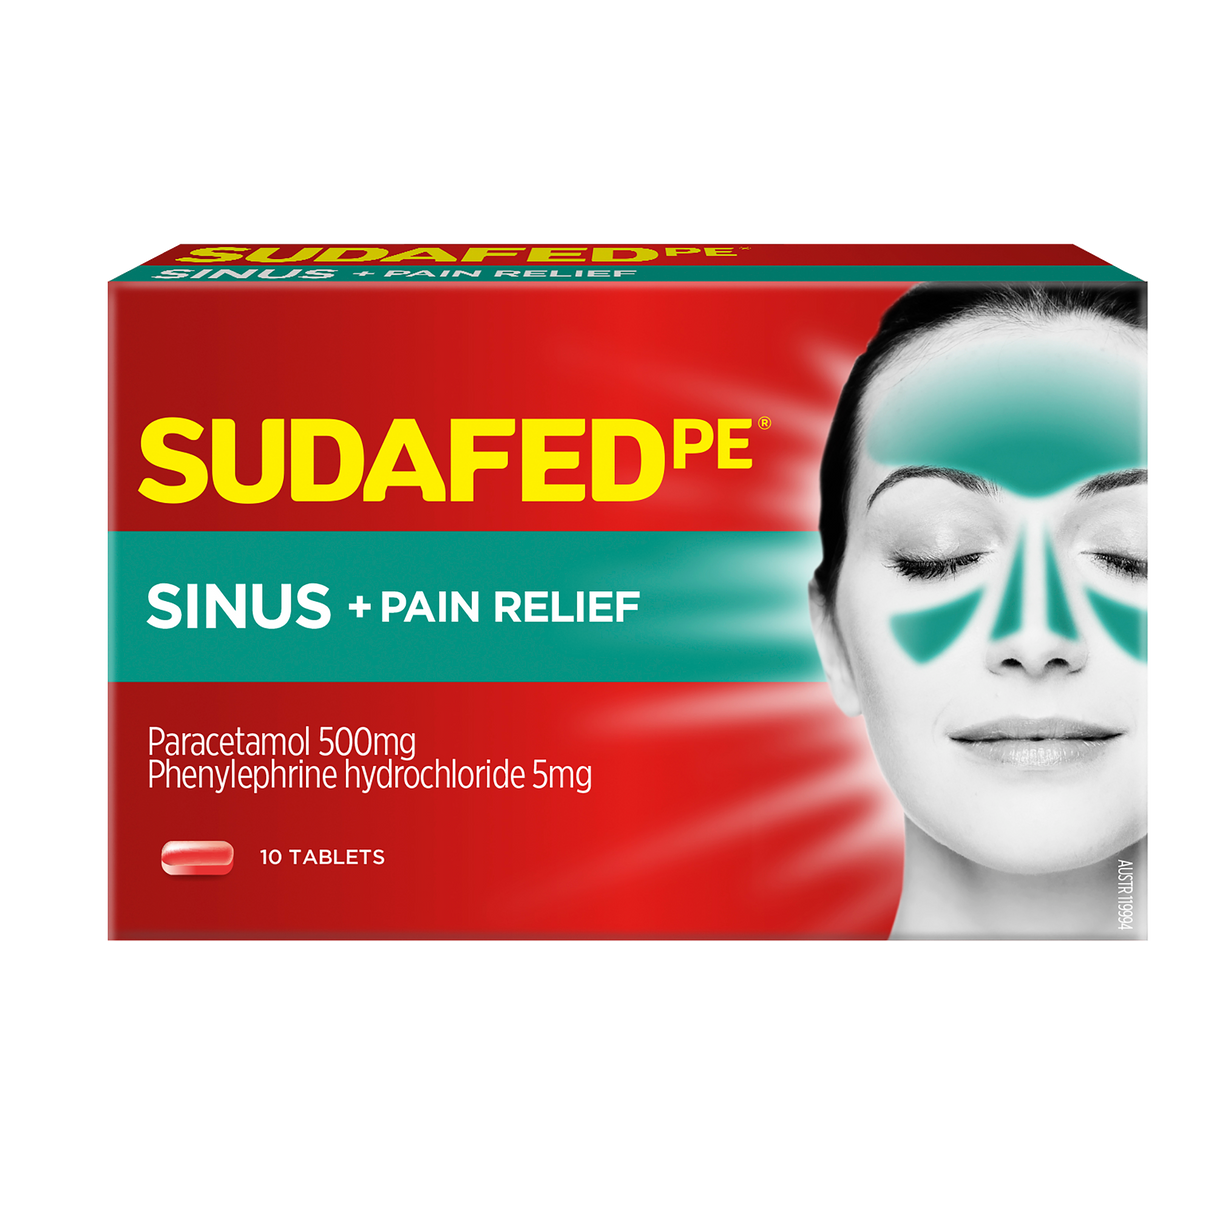 Sudafed PE Sinus + Pain Relief Tablets 10 Pack